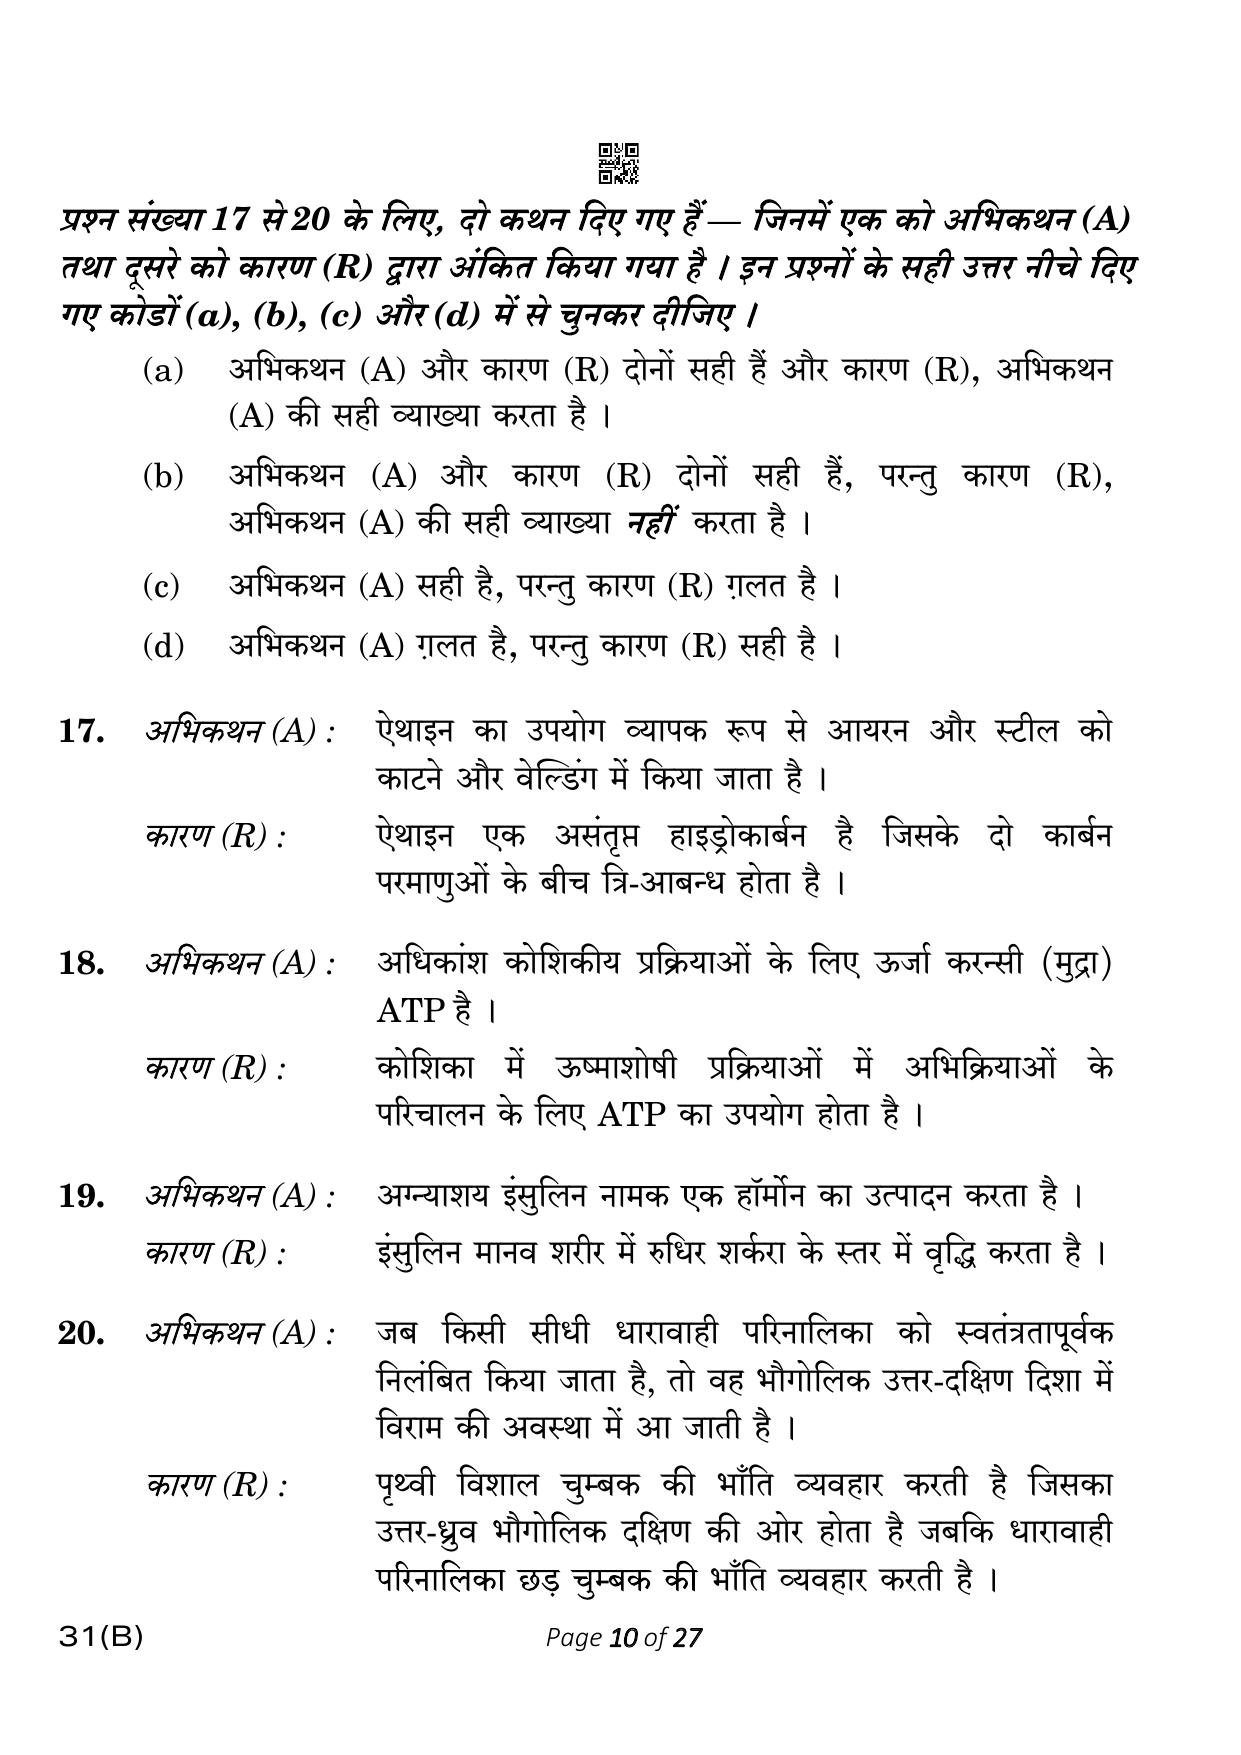 CBSE Class 10 31-B Science 2023 (Compartment) Question Paper - Page 10